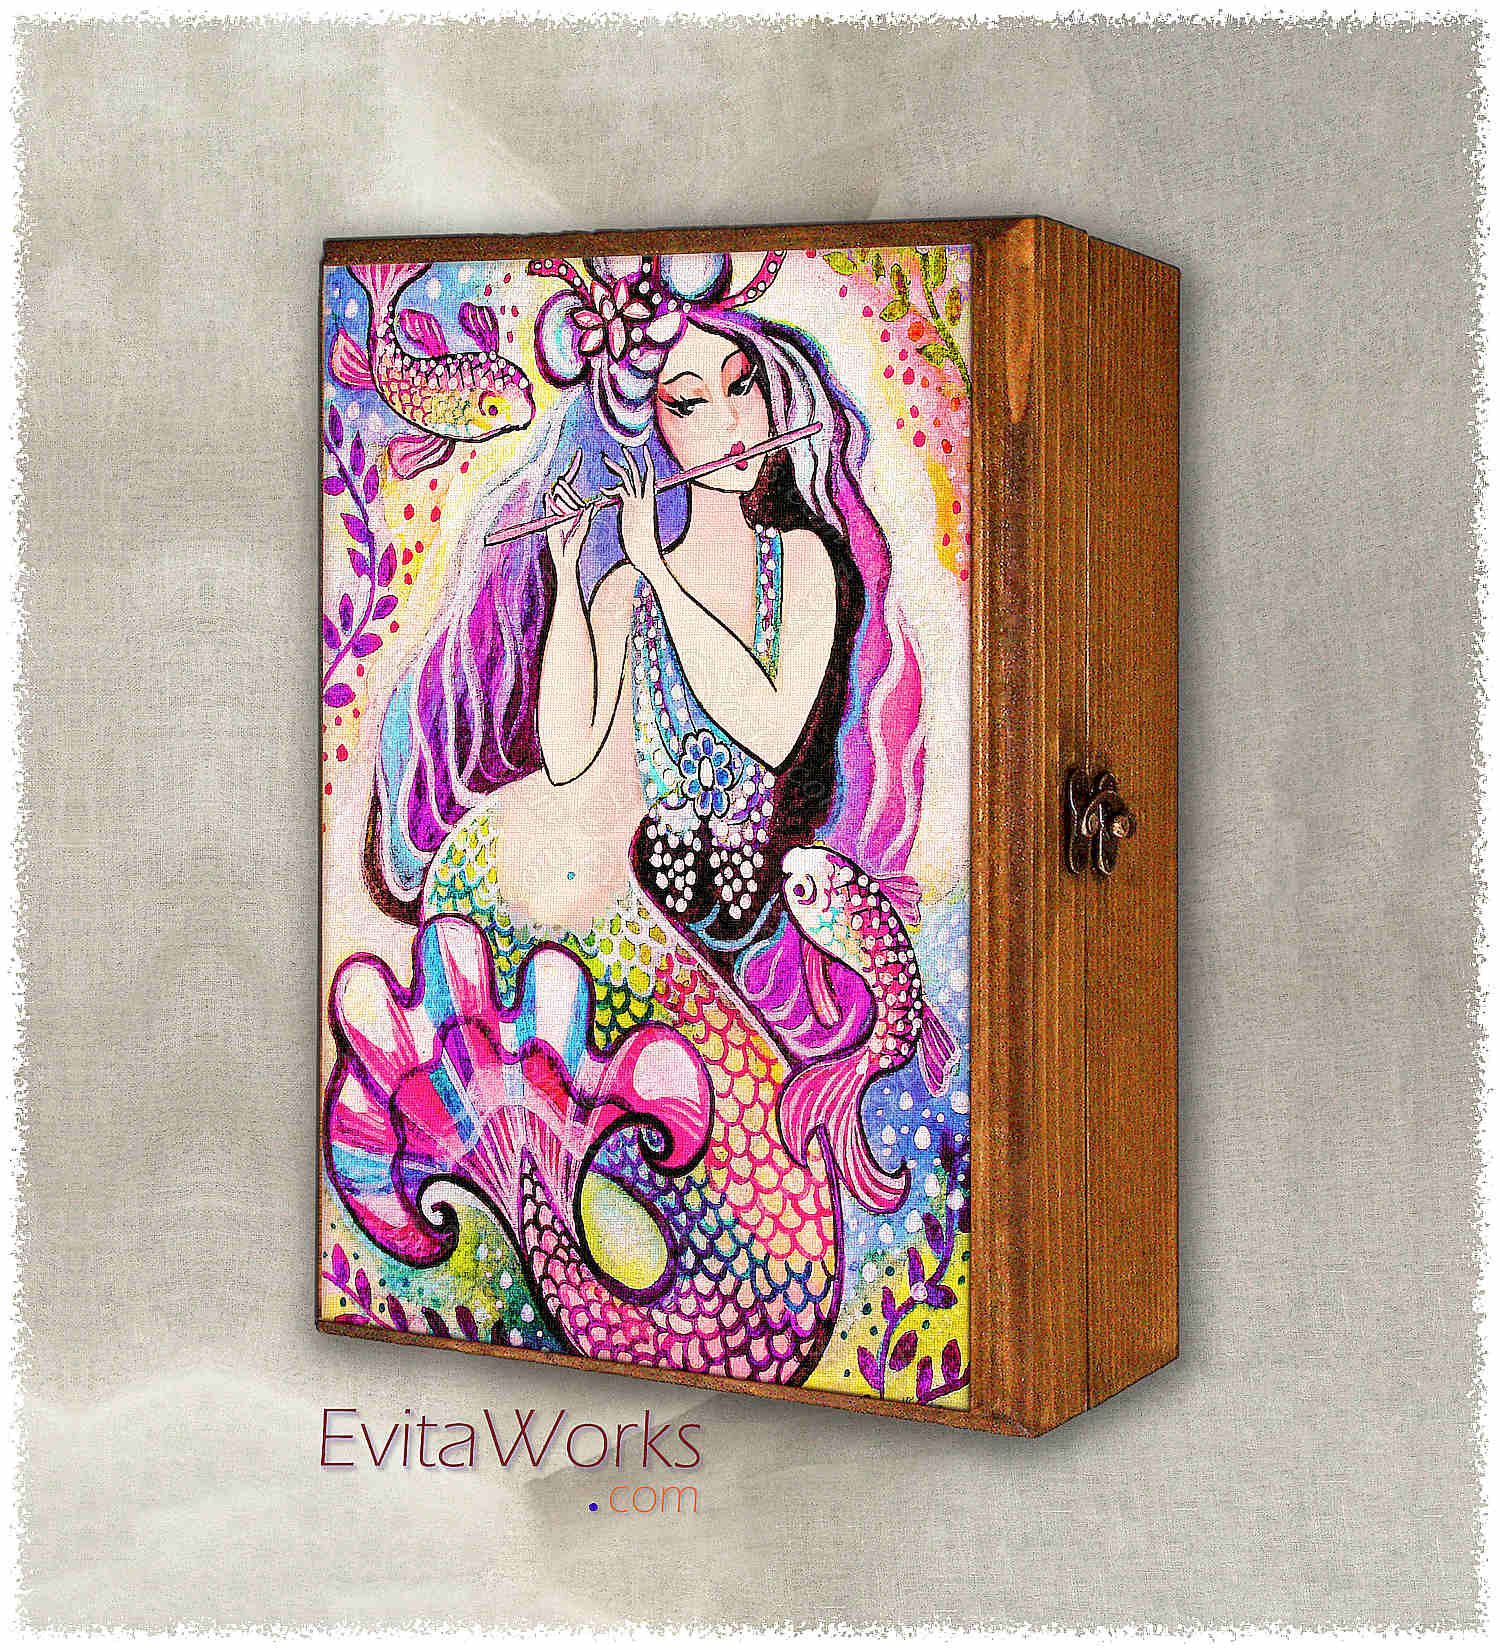 Hit to learn about "East Sea Mermaid, flute, koi fish" on jewelboxes